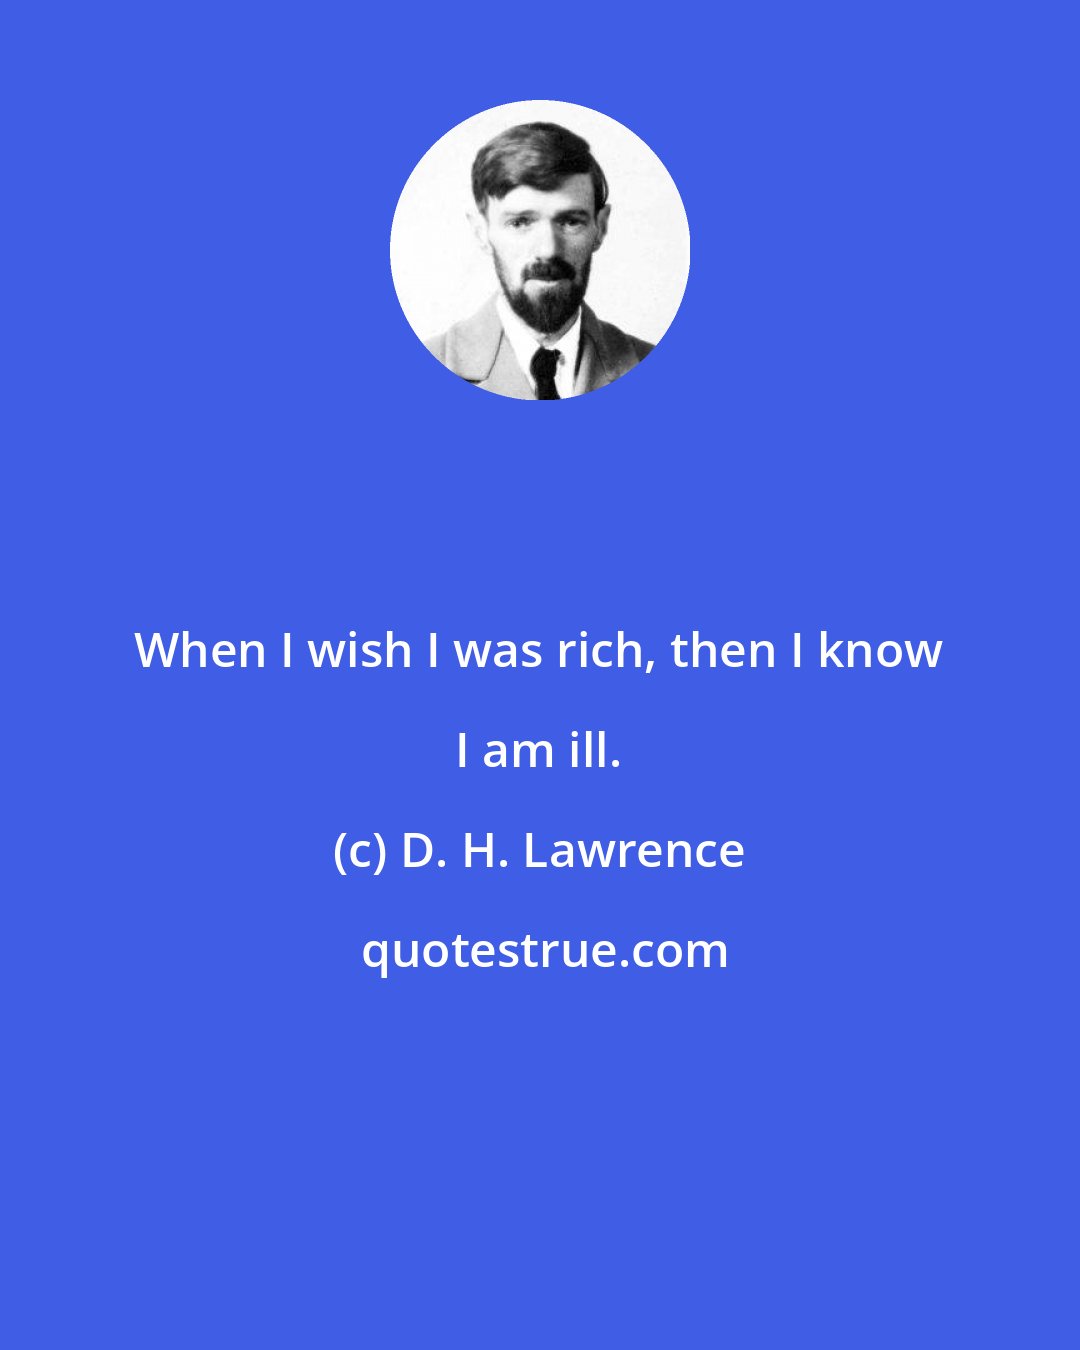 D. H. Lawrence: When I wish I was rich, then I know I am ill.